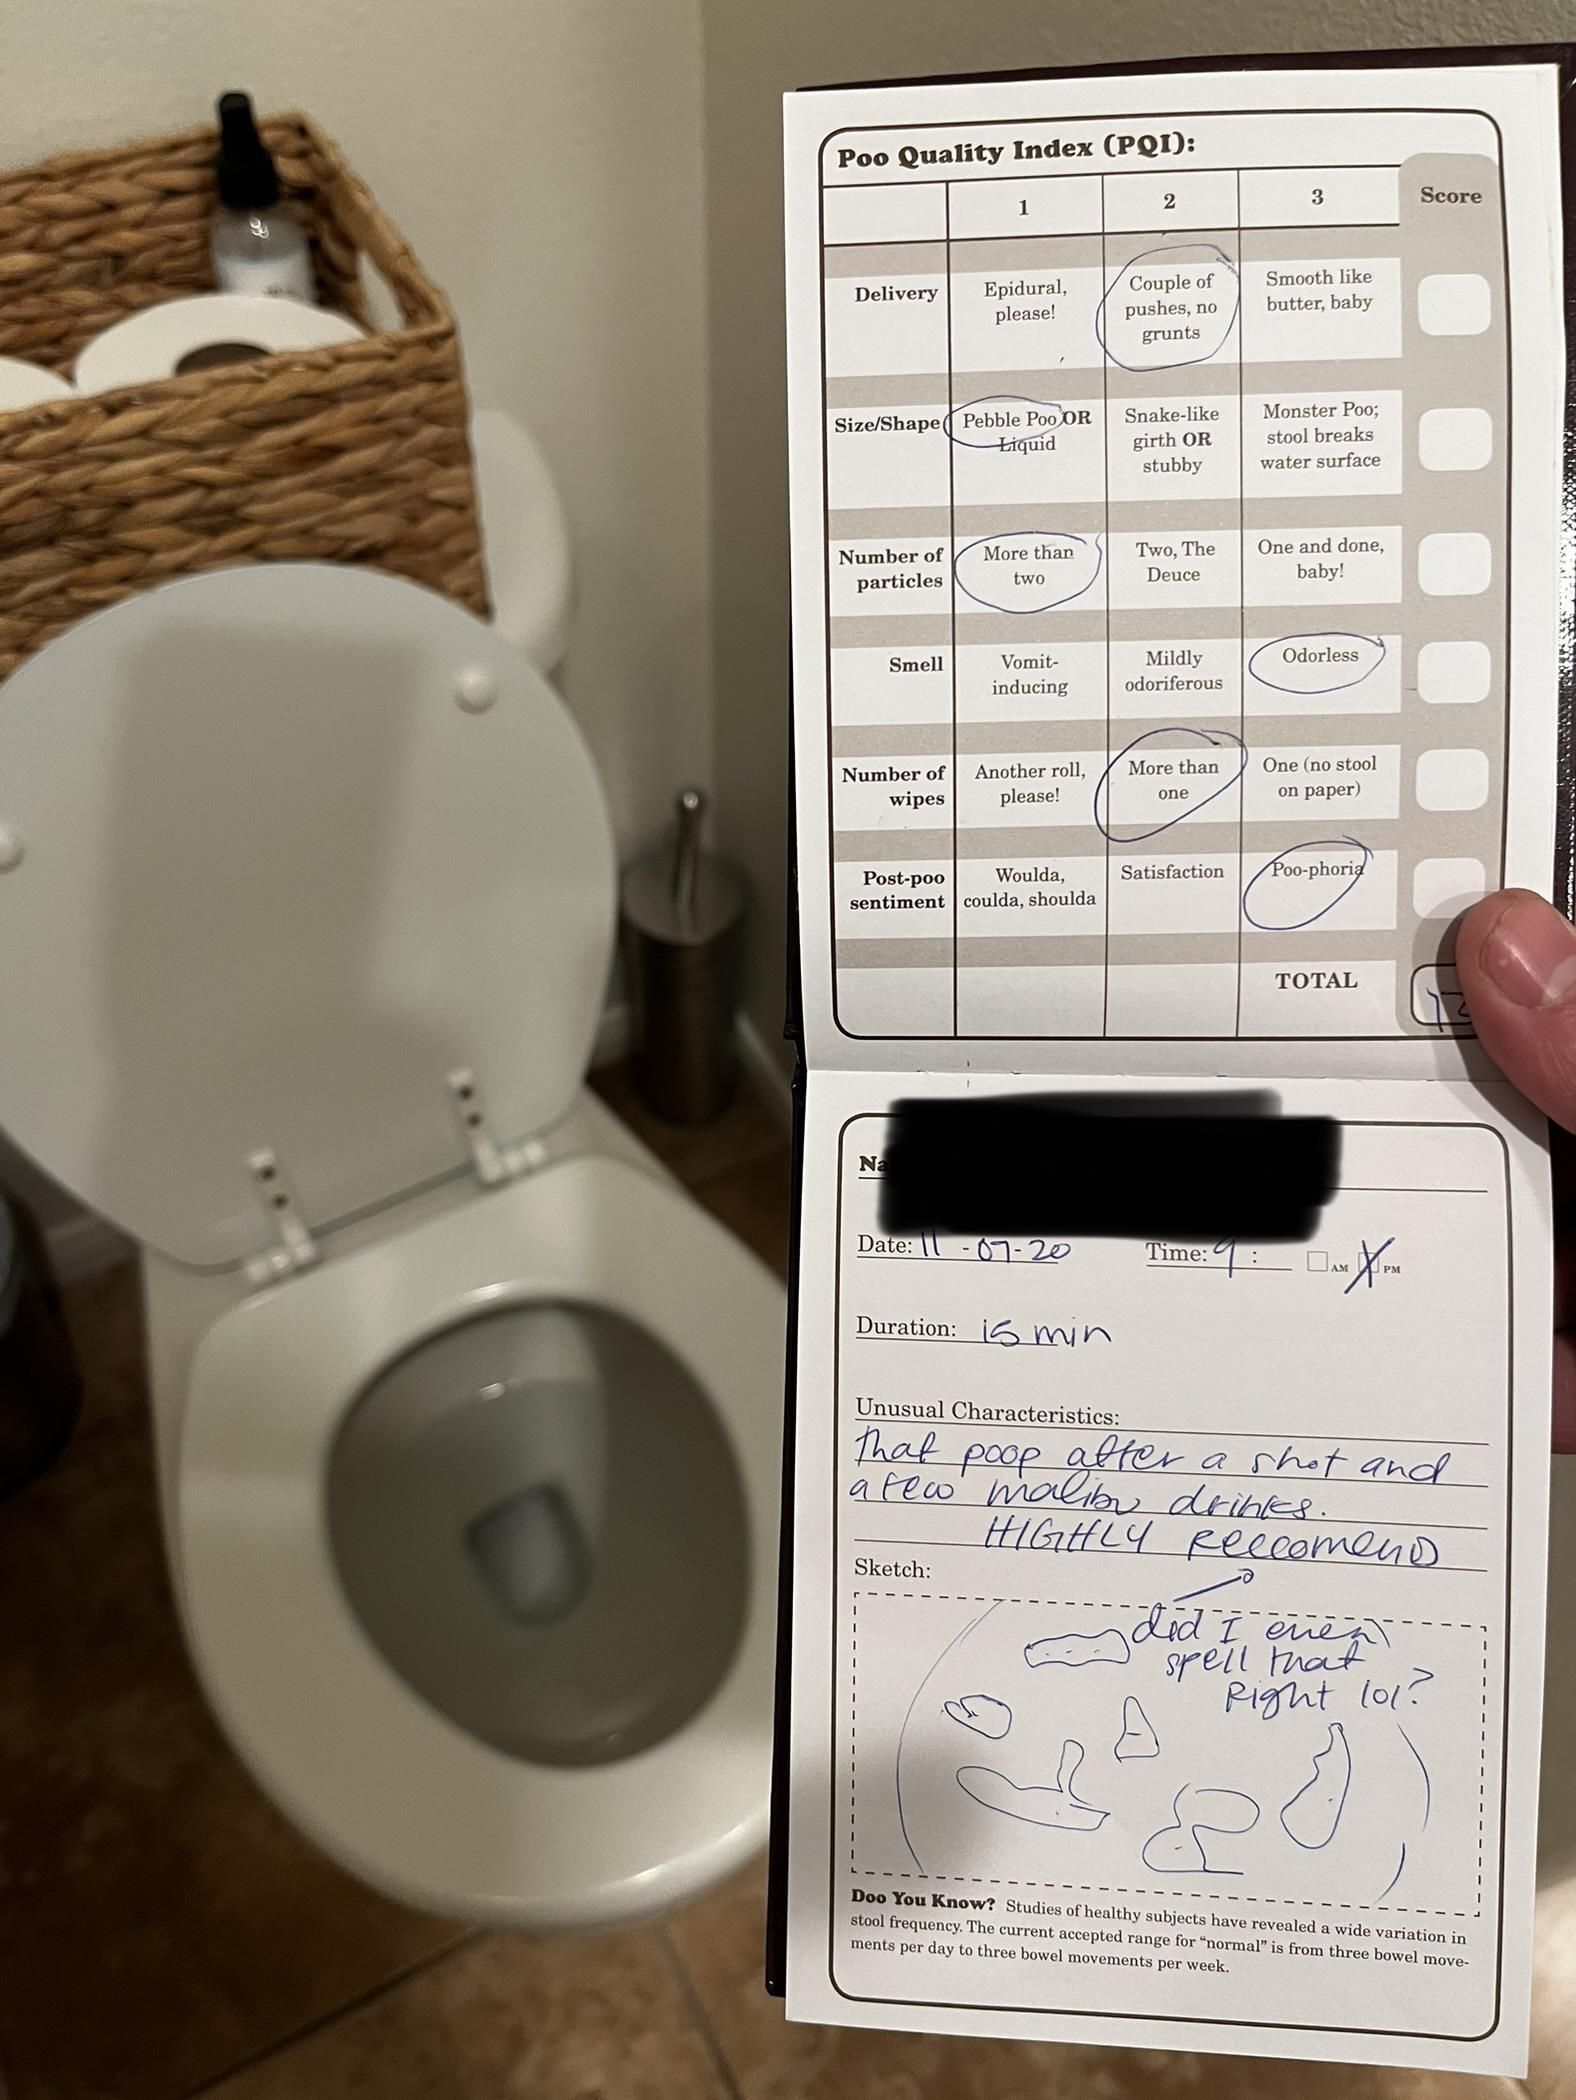 My Airbnb came with a “Poo Logbook” with over 100 entries by guests.